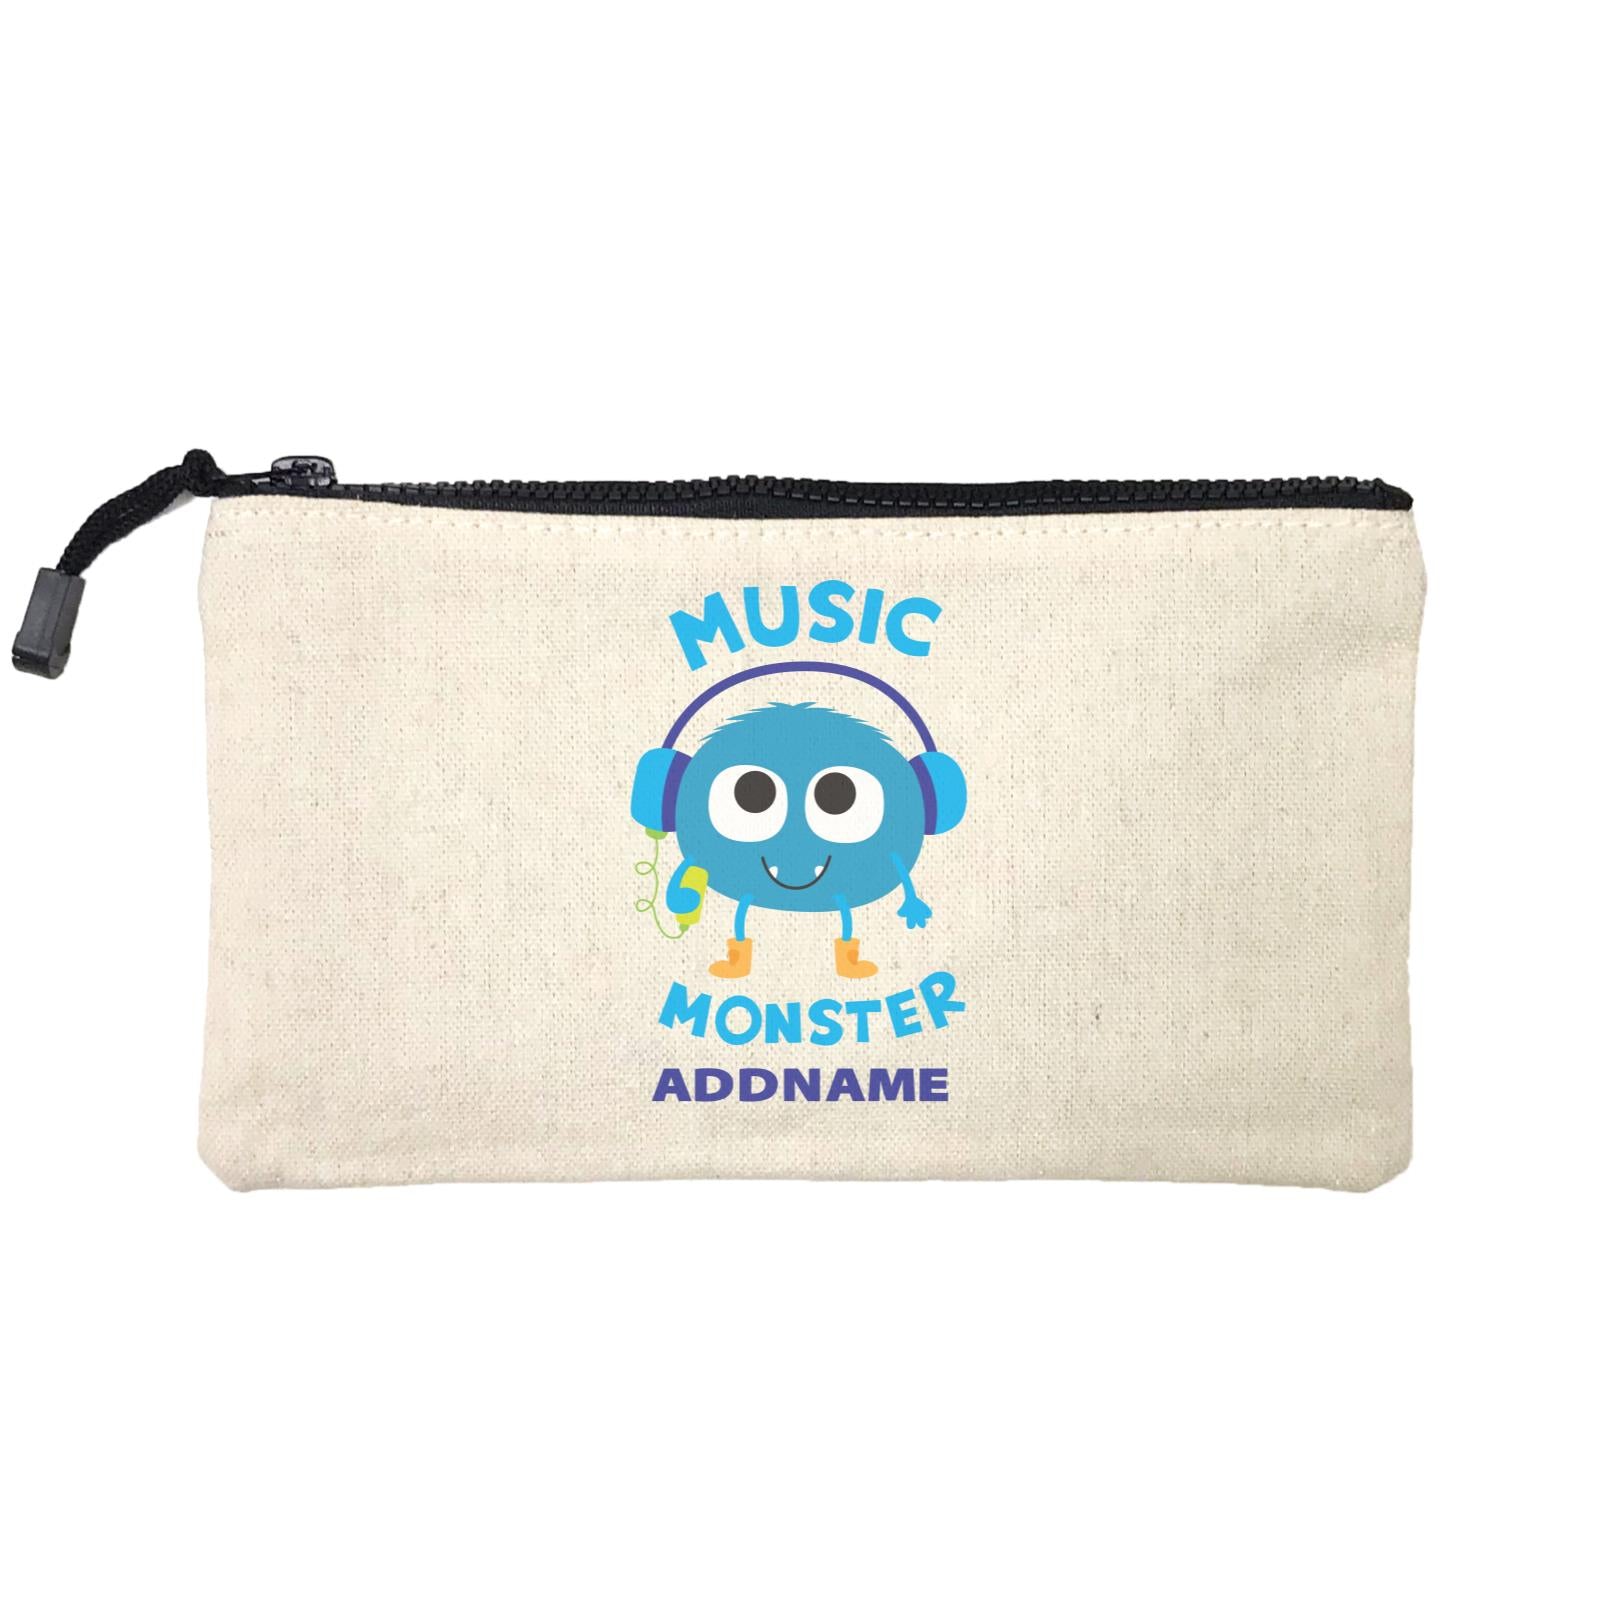 Cool Cute Monster Music Monster Addname Mini Accessories Stationery Pouch